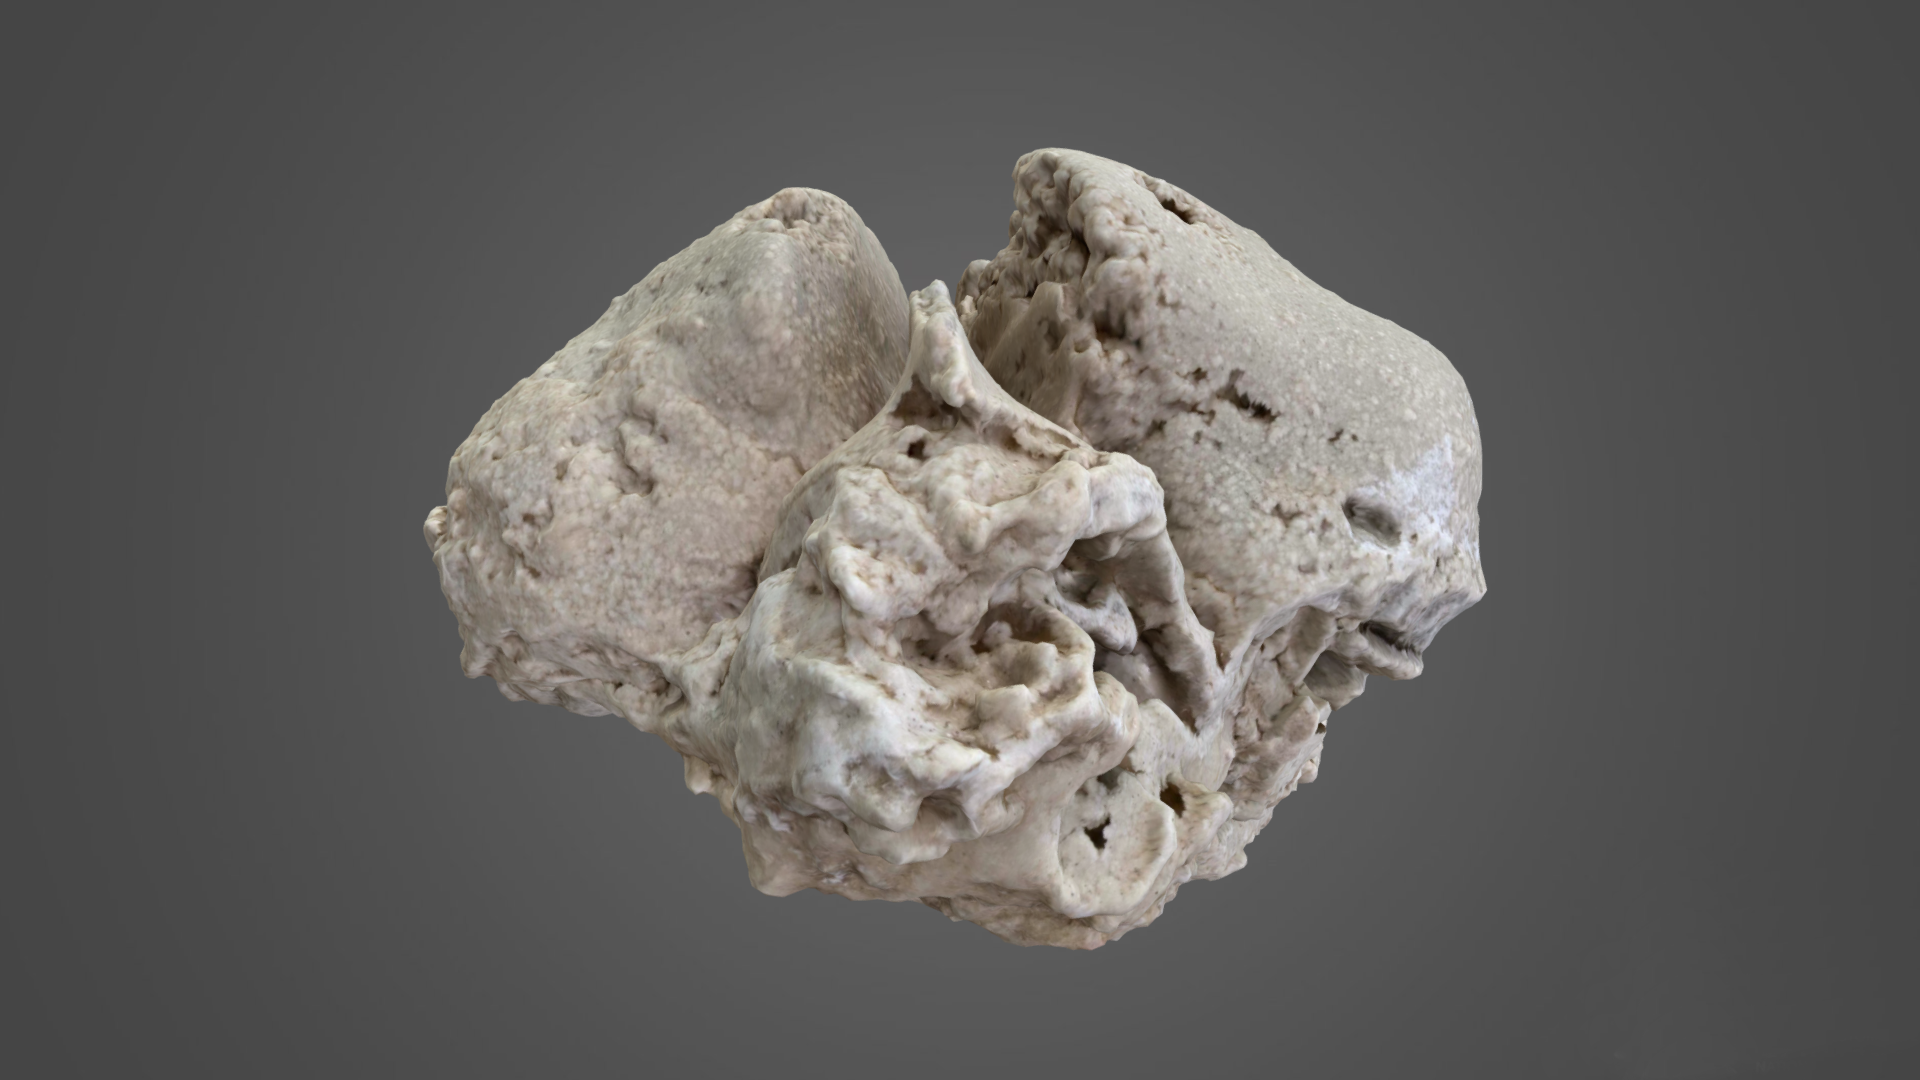 3D Scan of a Bivalve Cast Fossil